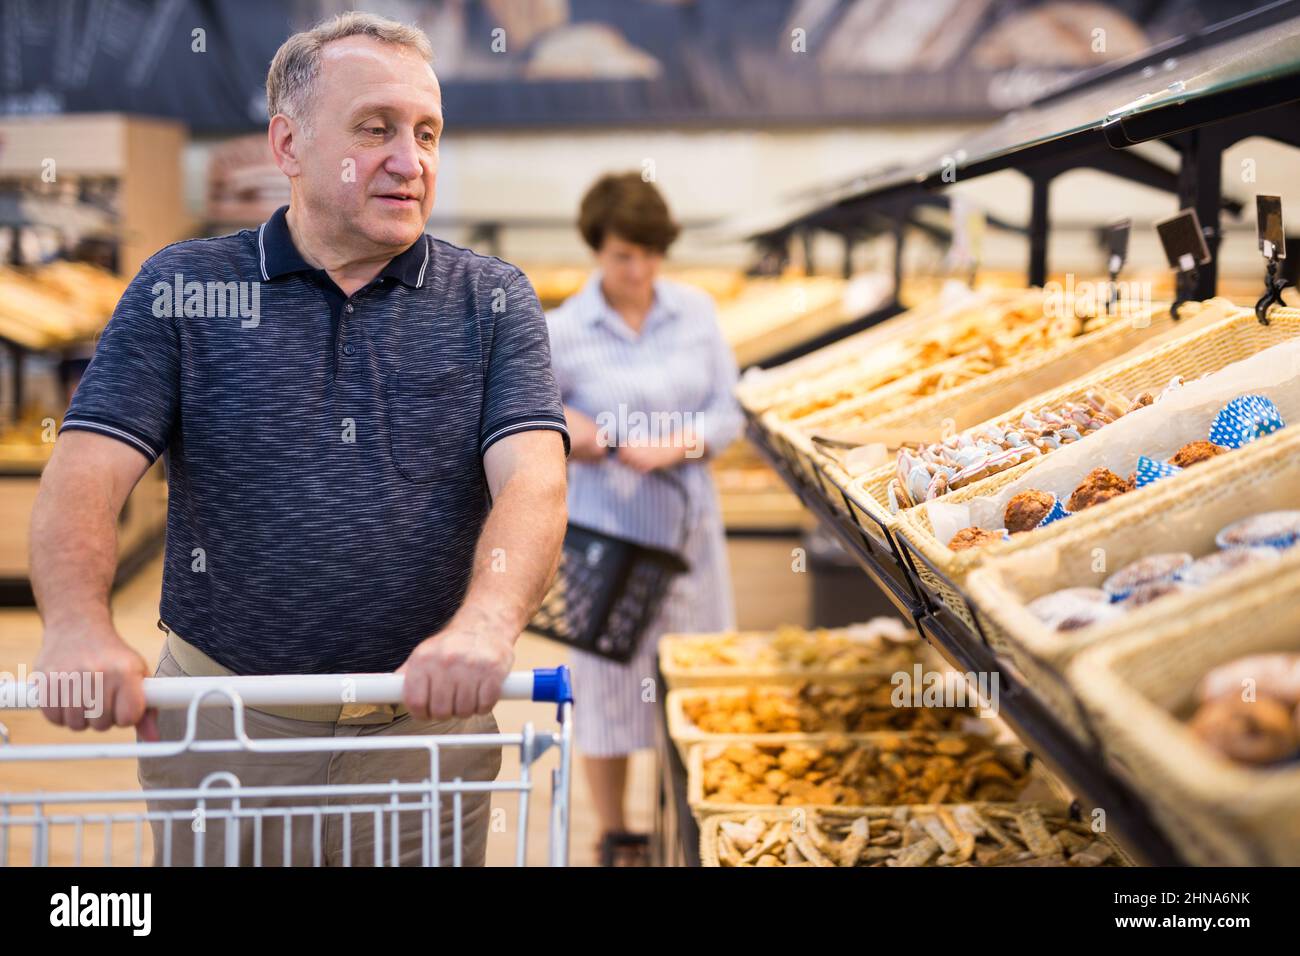 mature man choosing bread and baking in grocery section of supermarket Stock Photo